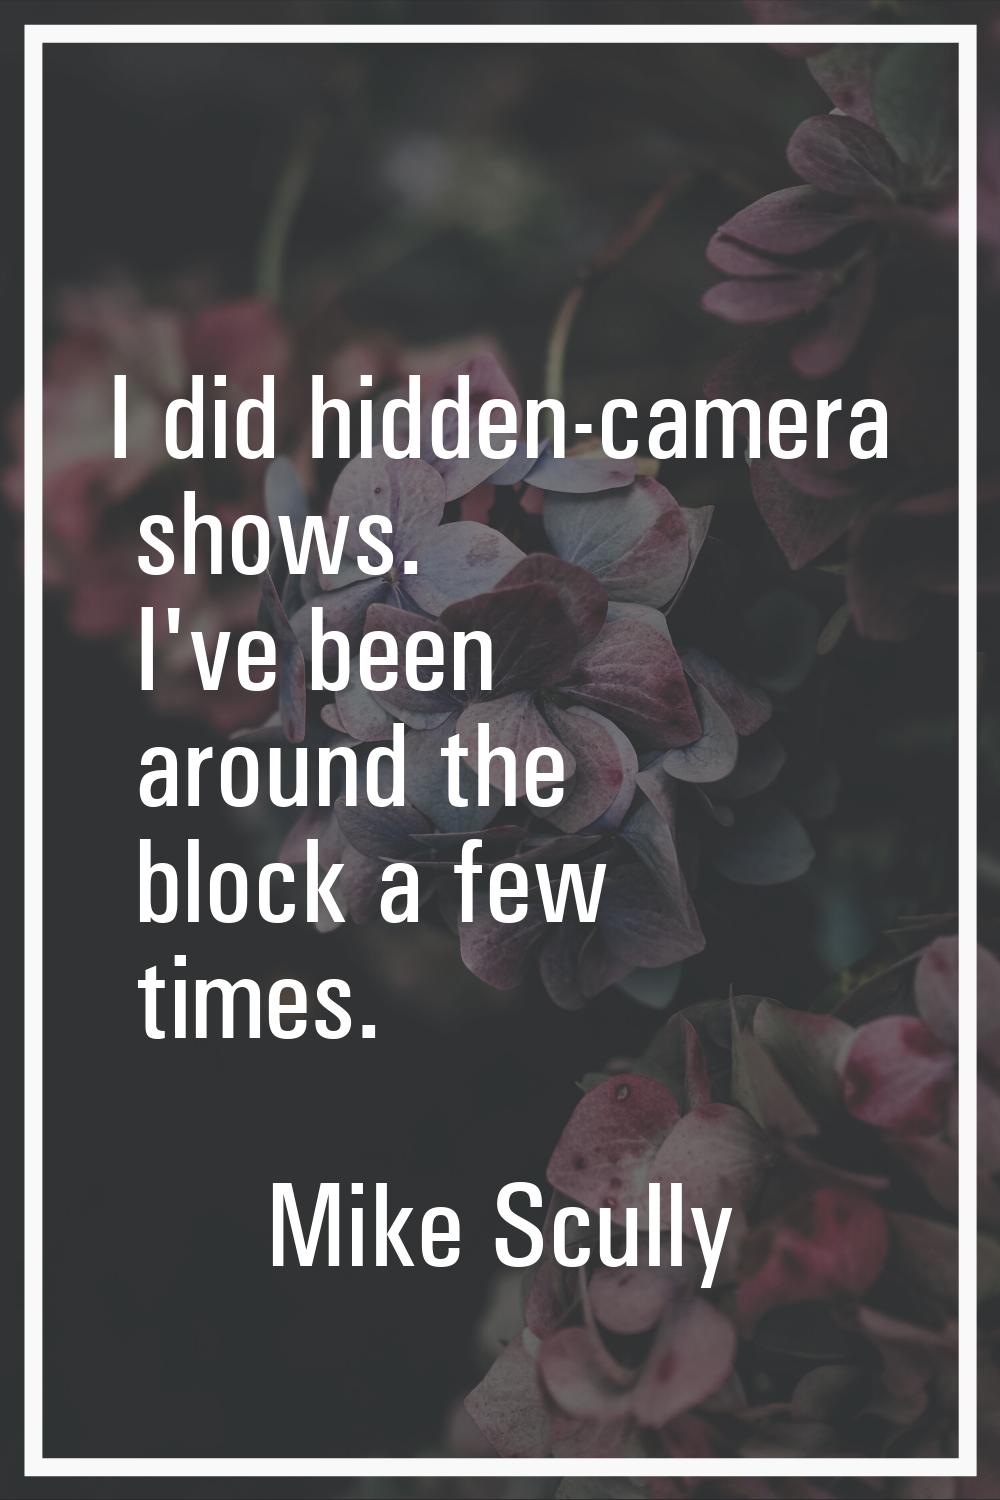 I did hidden-camera shows. I've been around the block a few times.